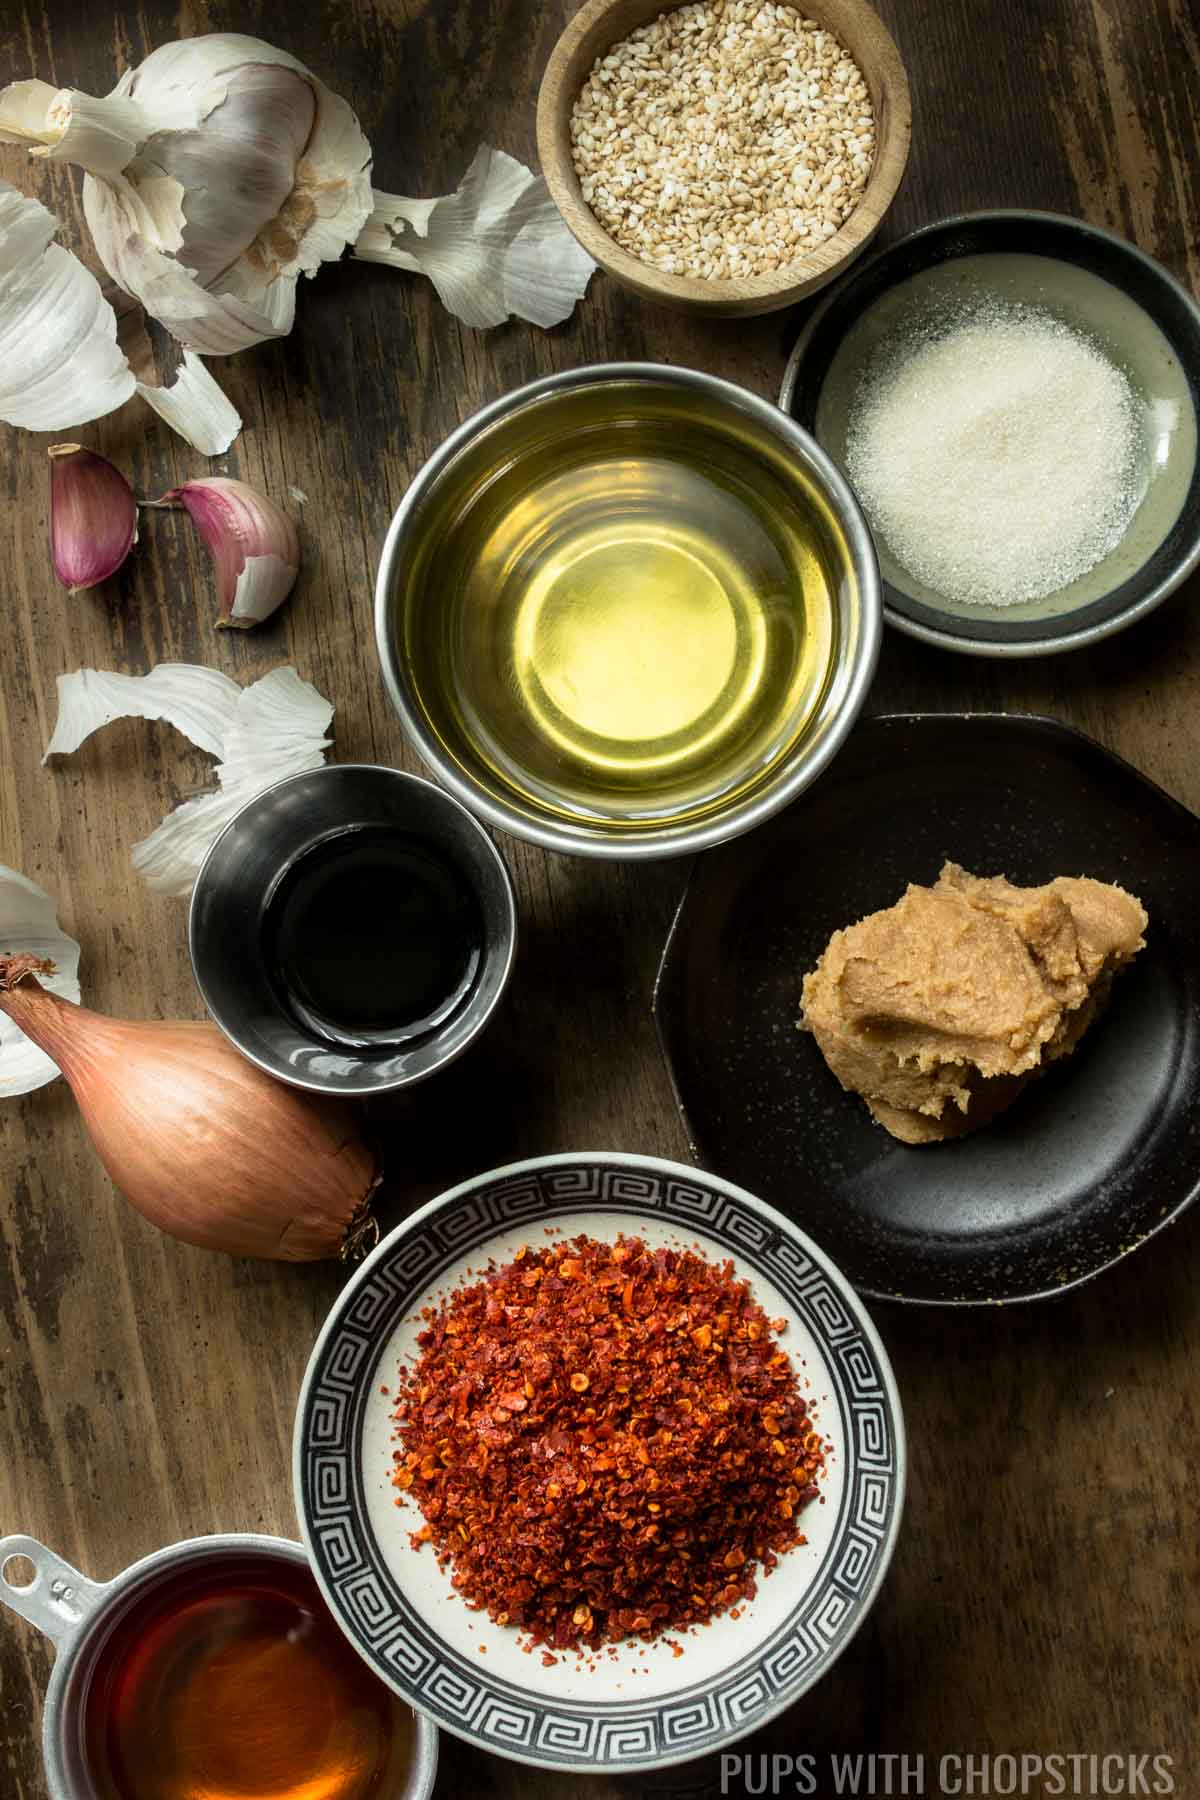 Ingredients for garlic chili oil (chili flakes, shallot, garlic, oil, miso, sugar, soy sauce, sesame seeds)